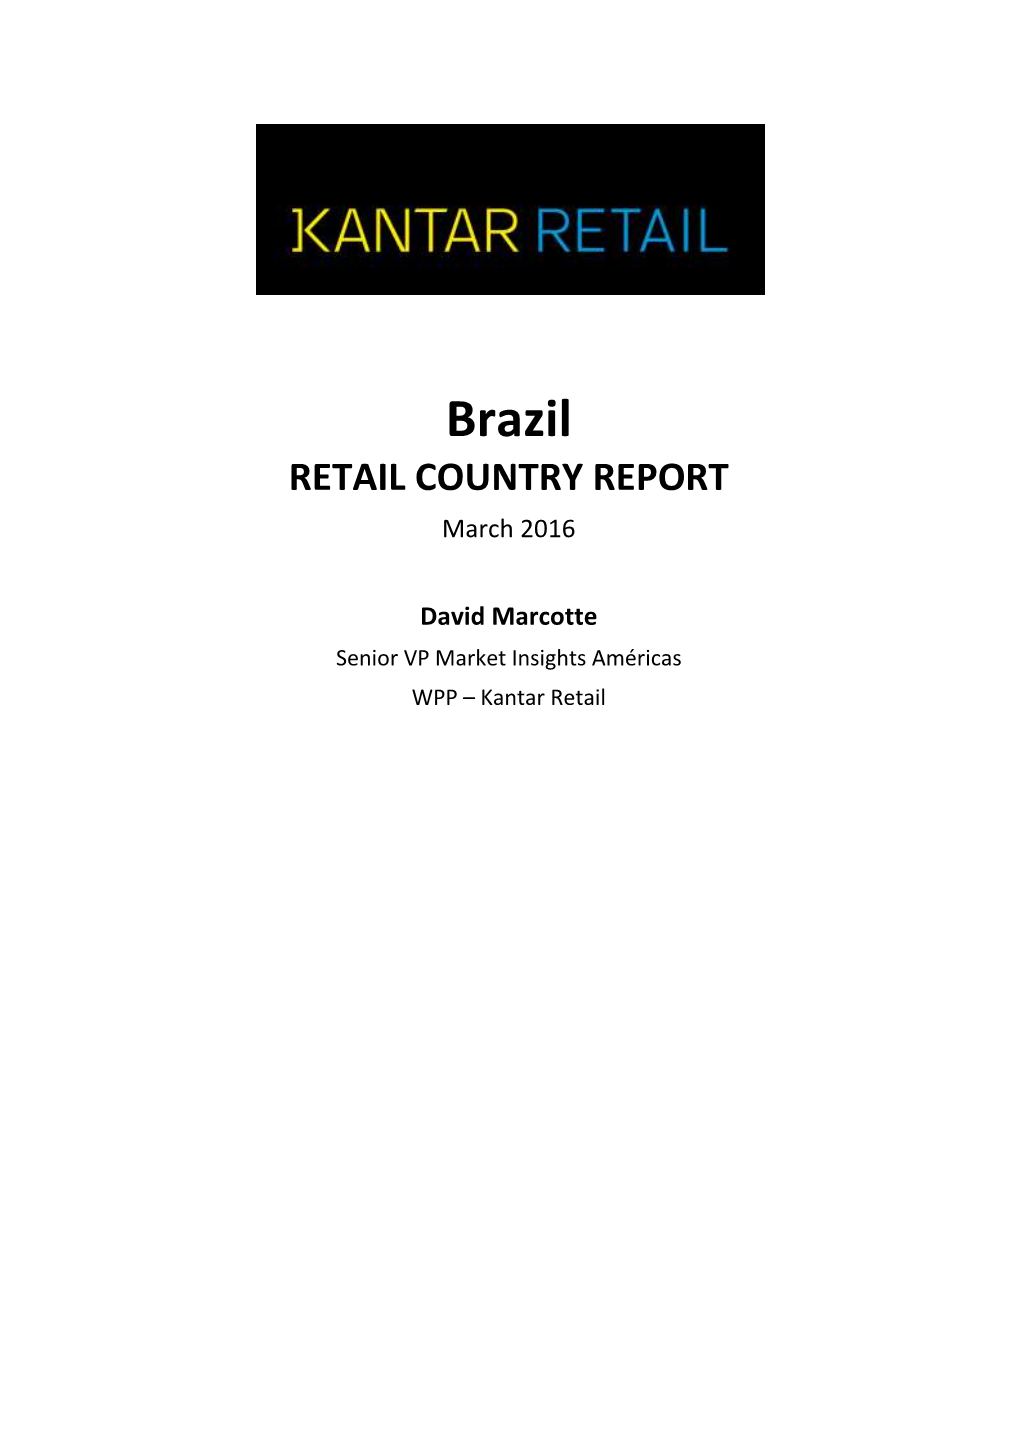 Brazil RETAIL COUNTRY REPORT March 2016